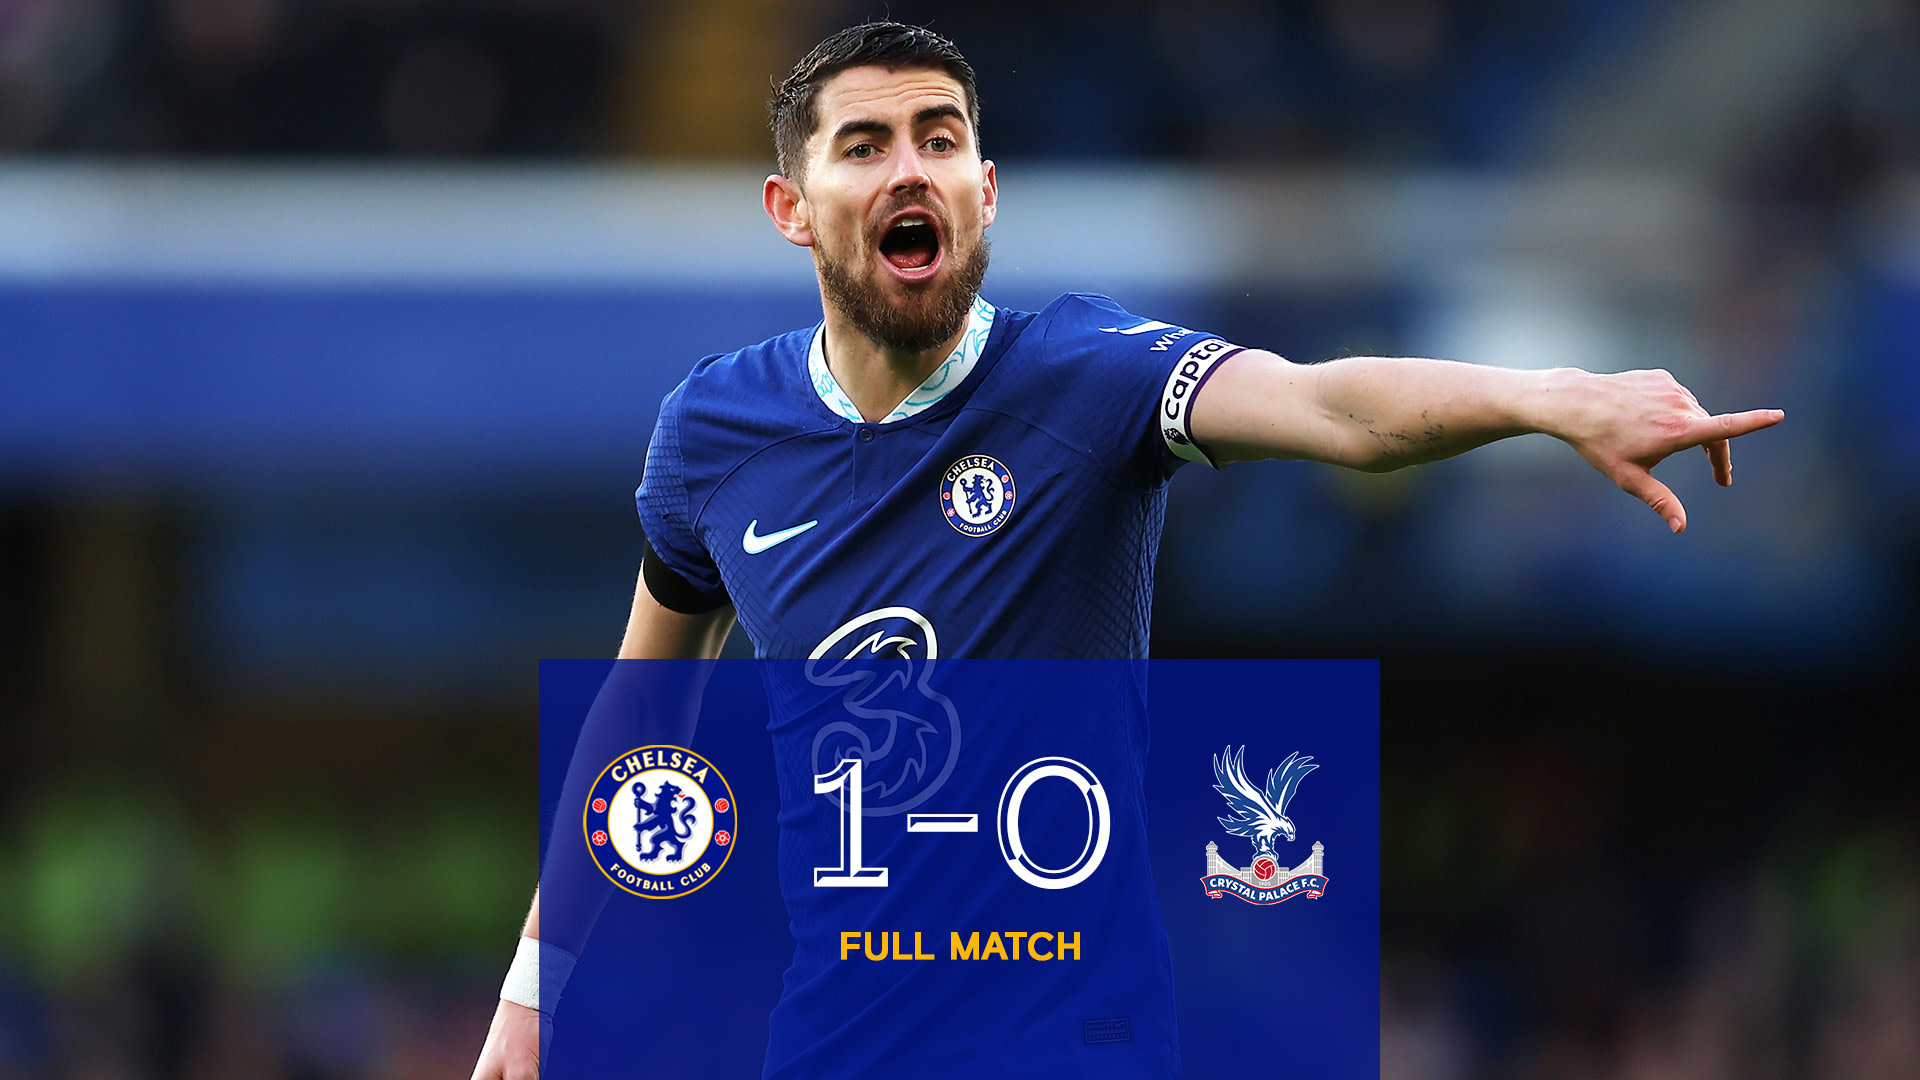 Full Match Chelsea 1-0 Palace Video Official Site Chelsea Football Club